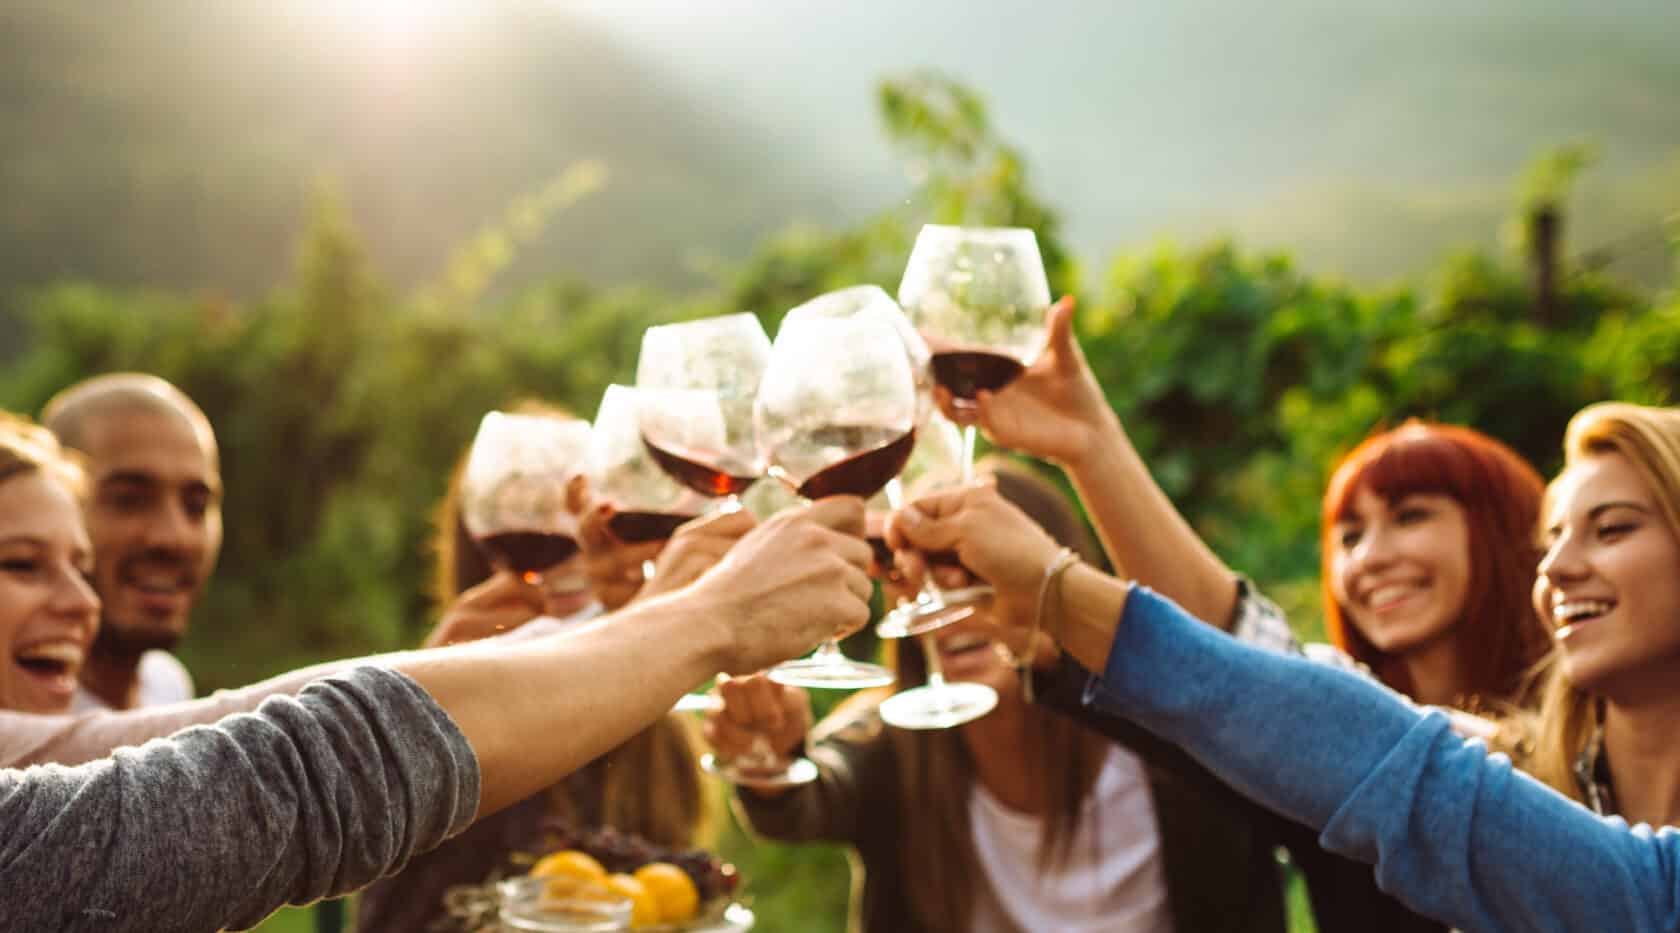 A group of friends enjoying a glass of wine together.